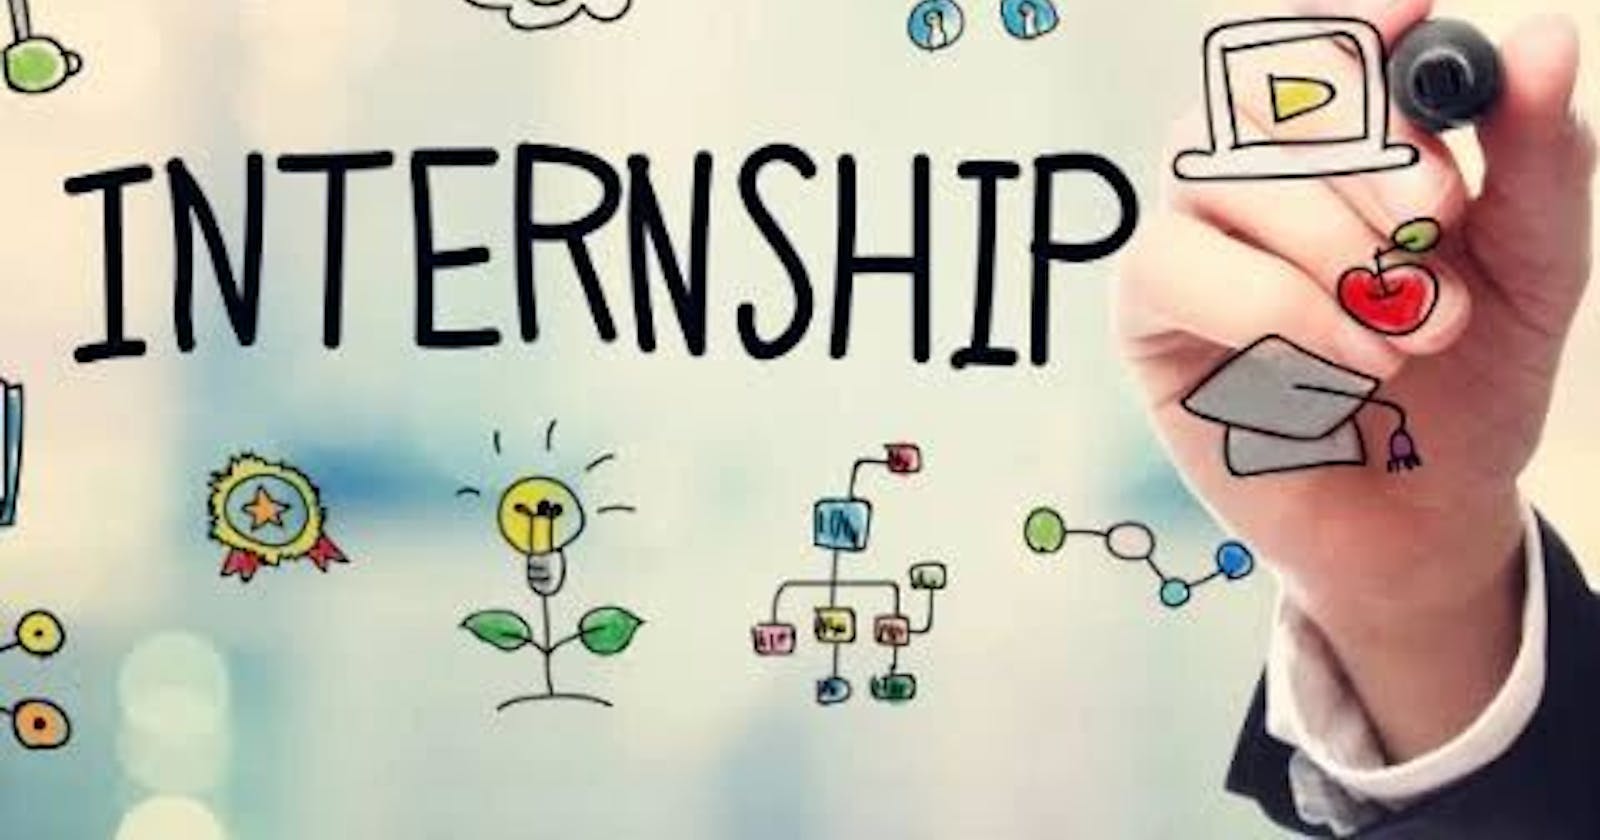 How to get internships (things you need to know)